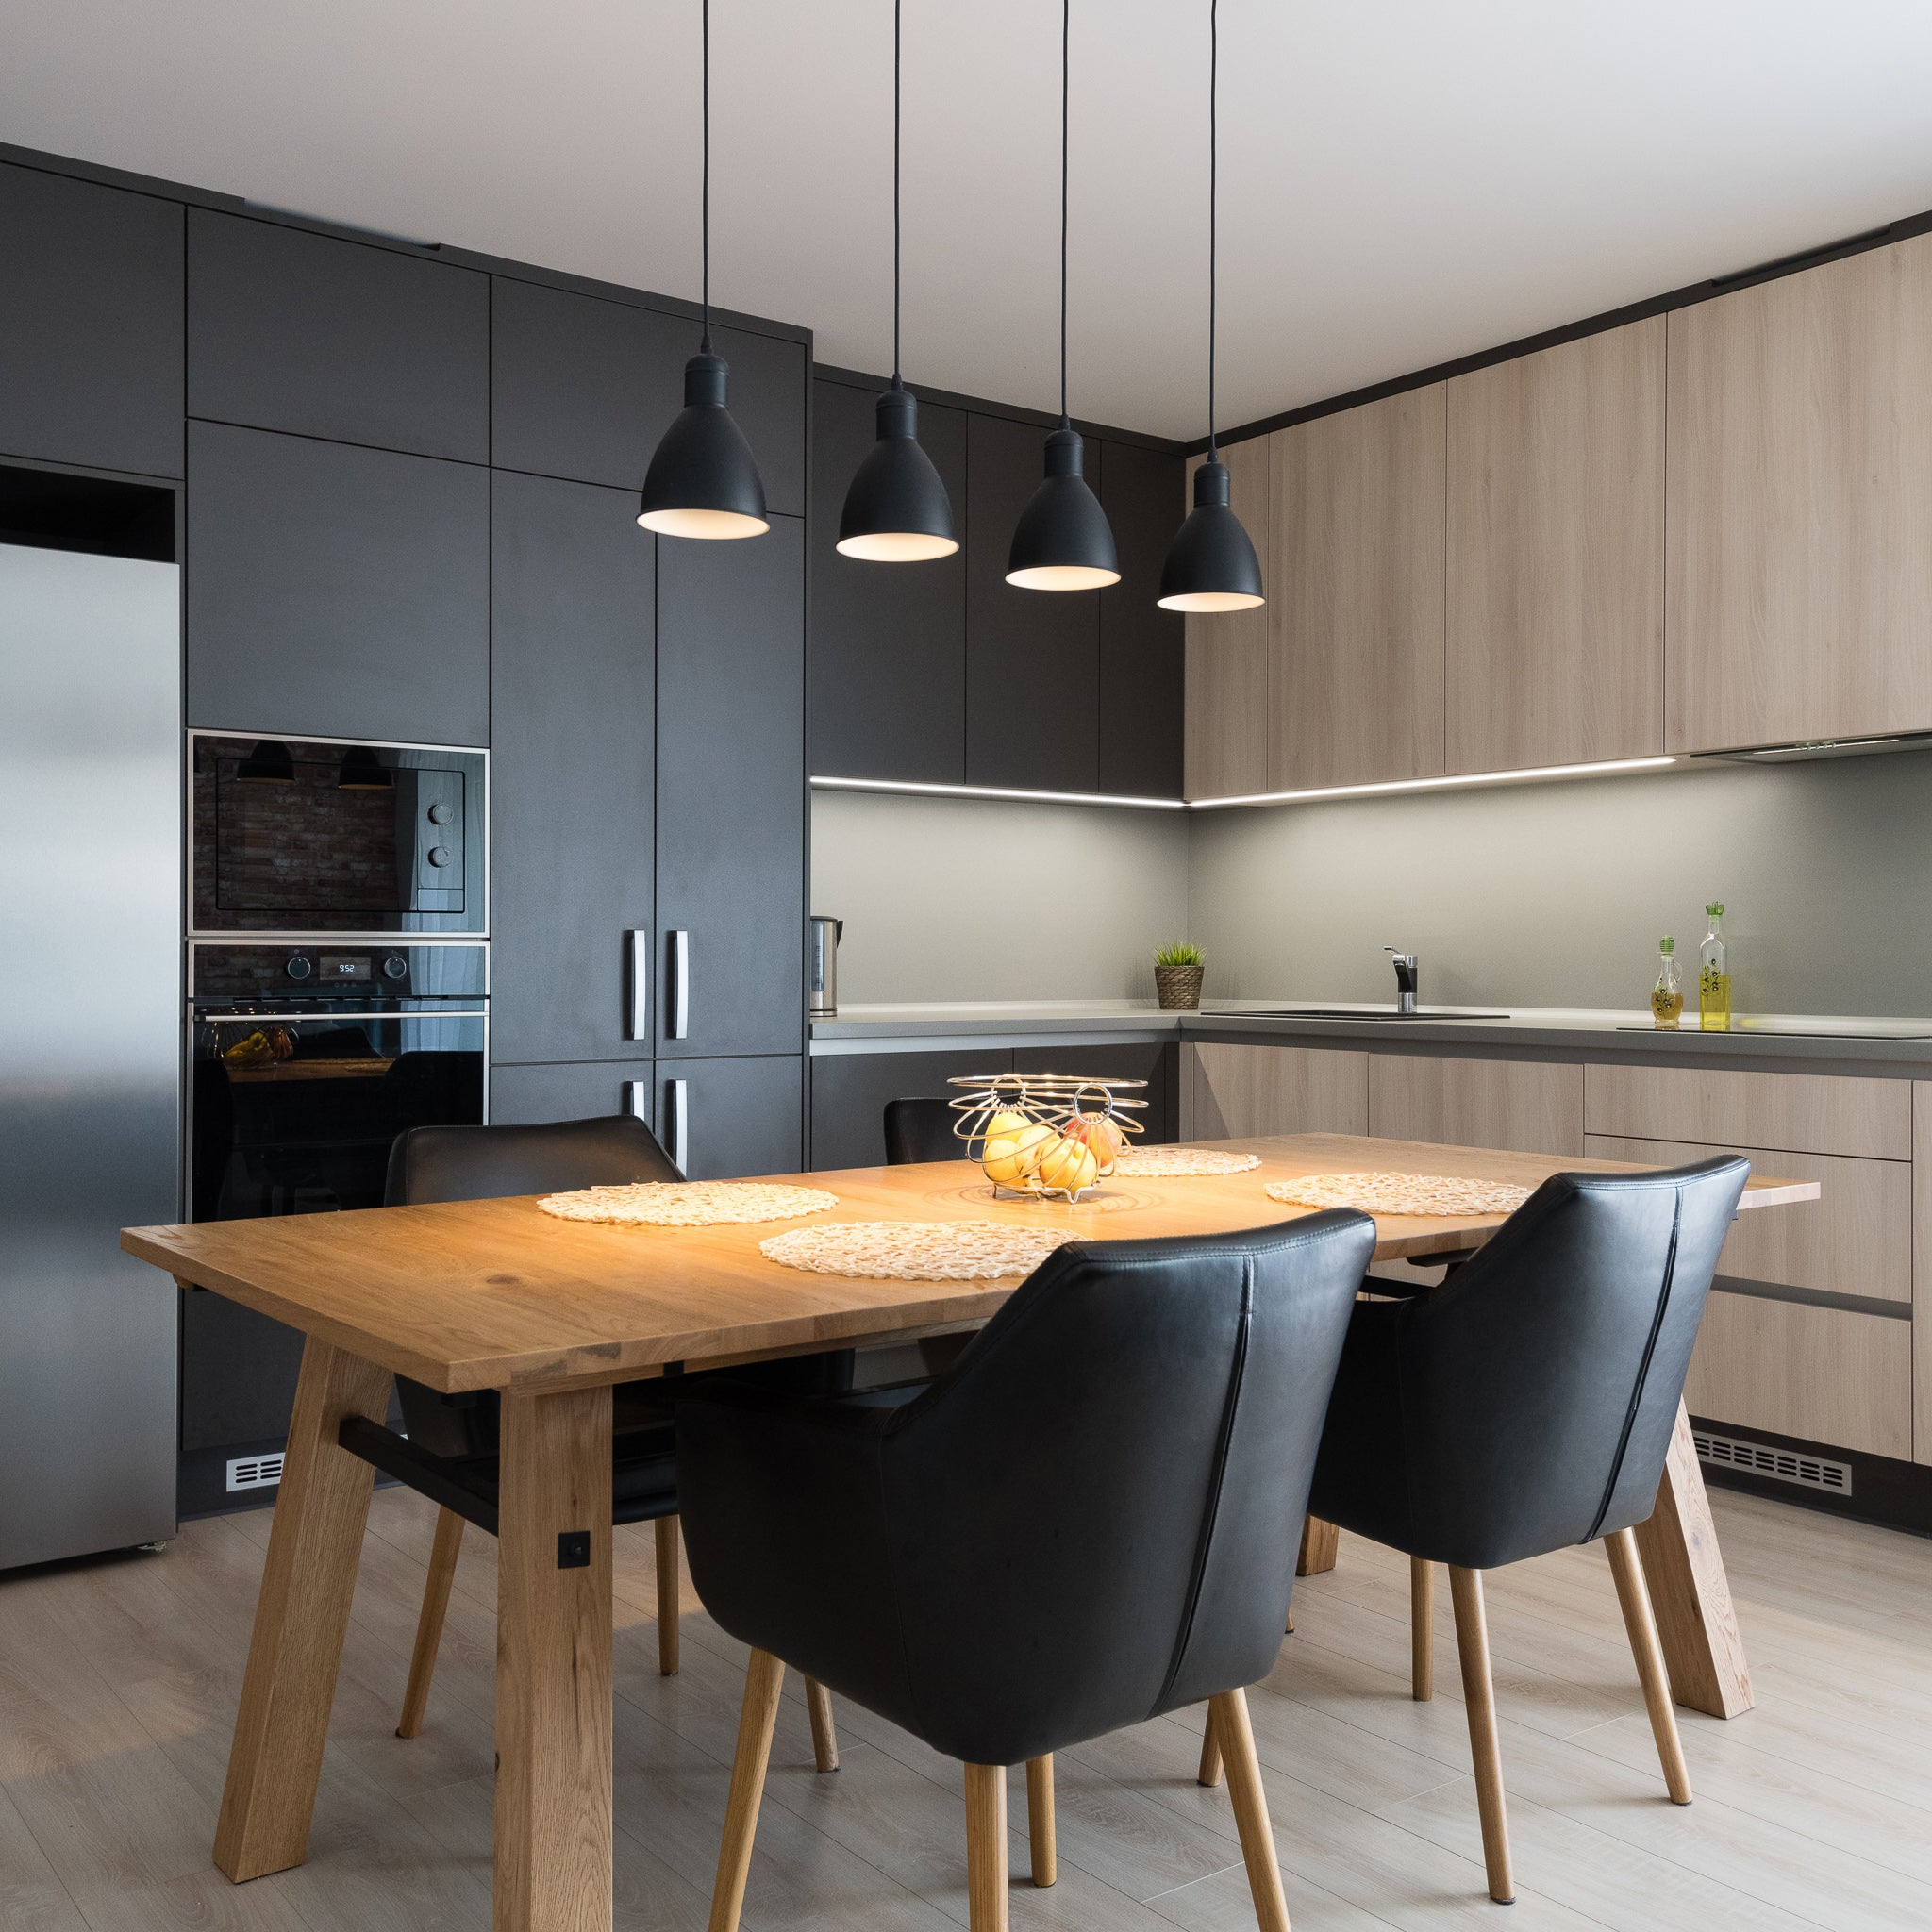 Choosing The Perfect style of Kitchen